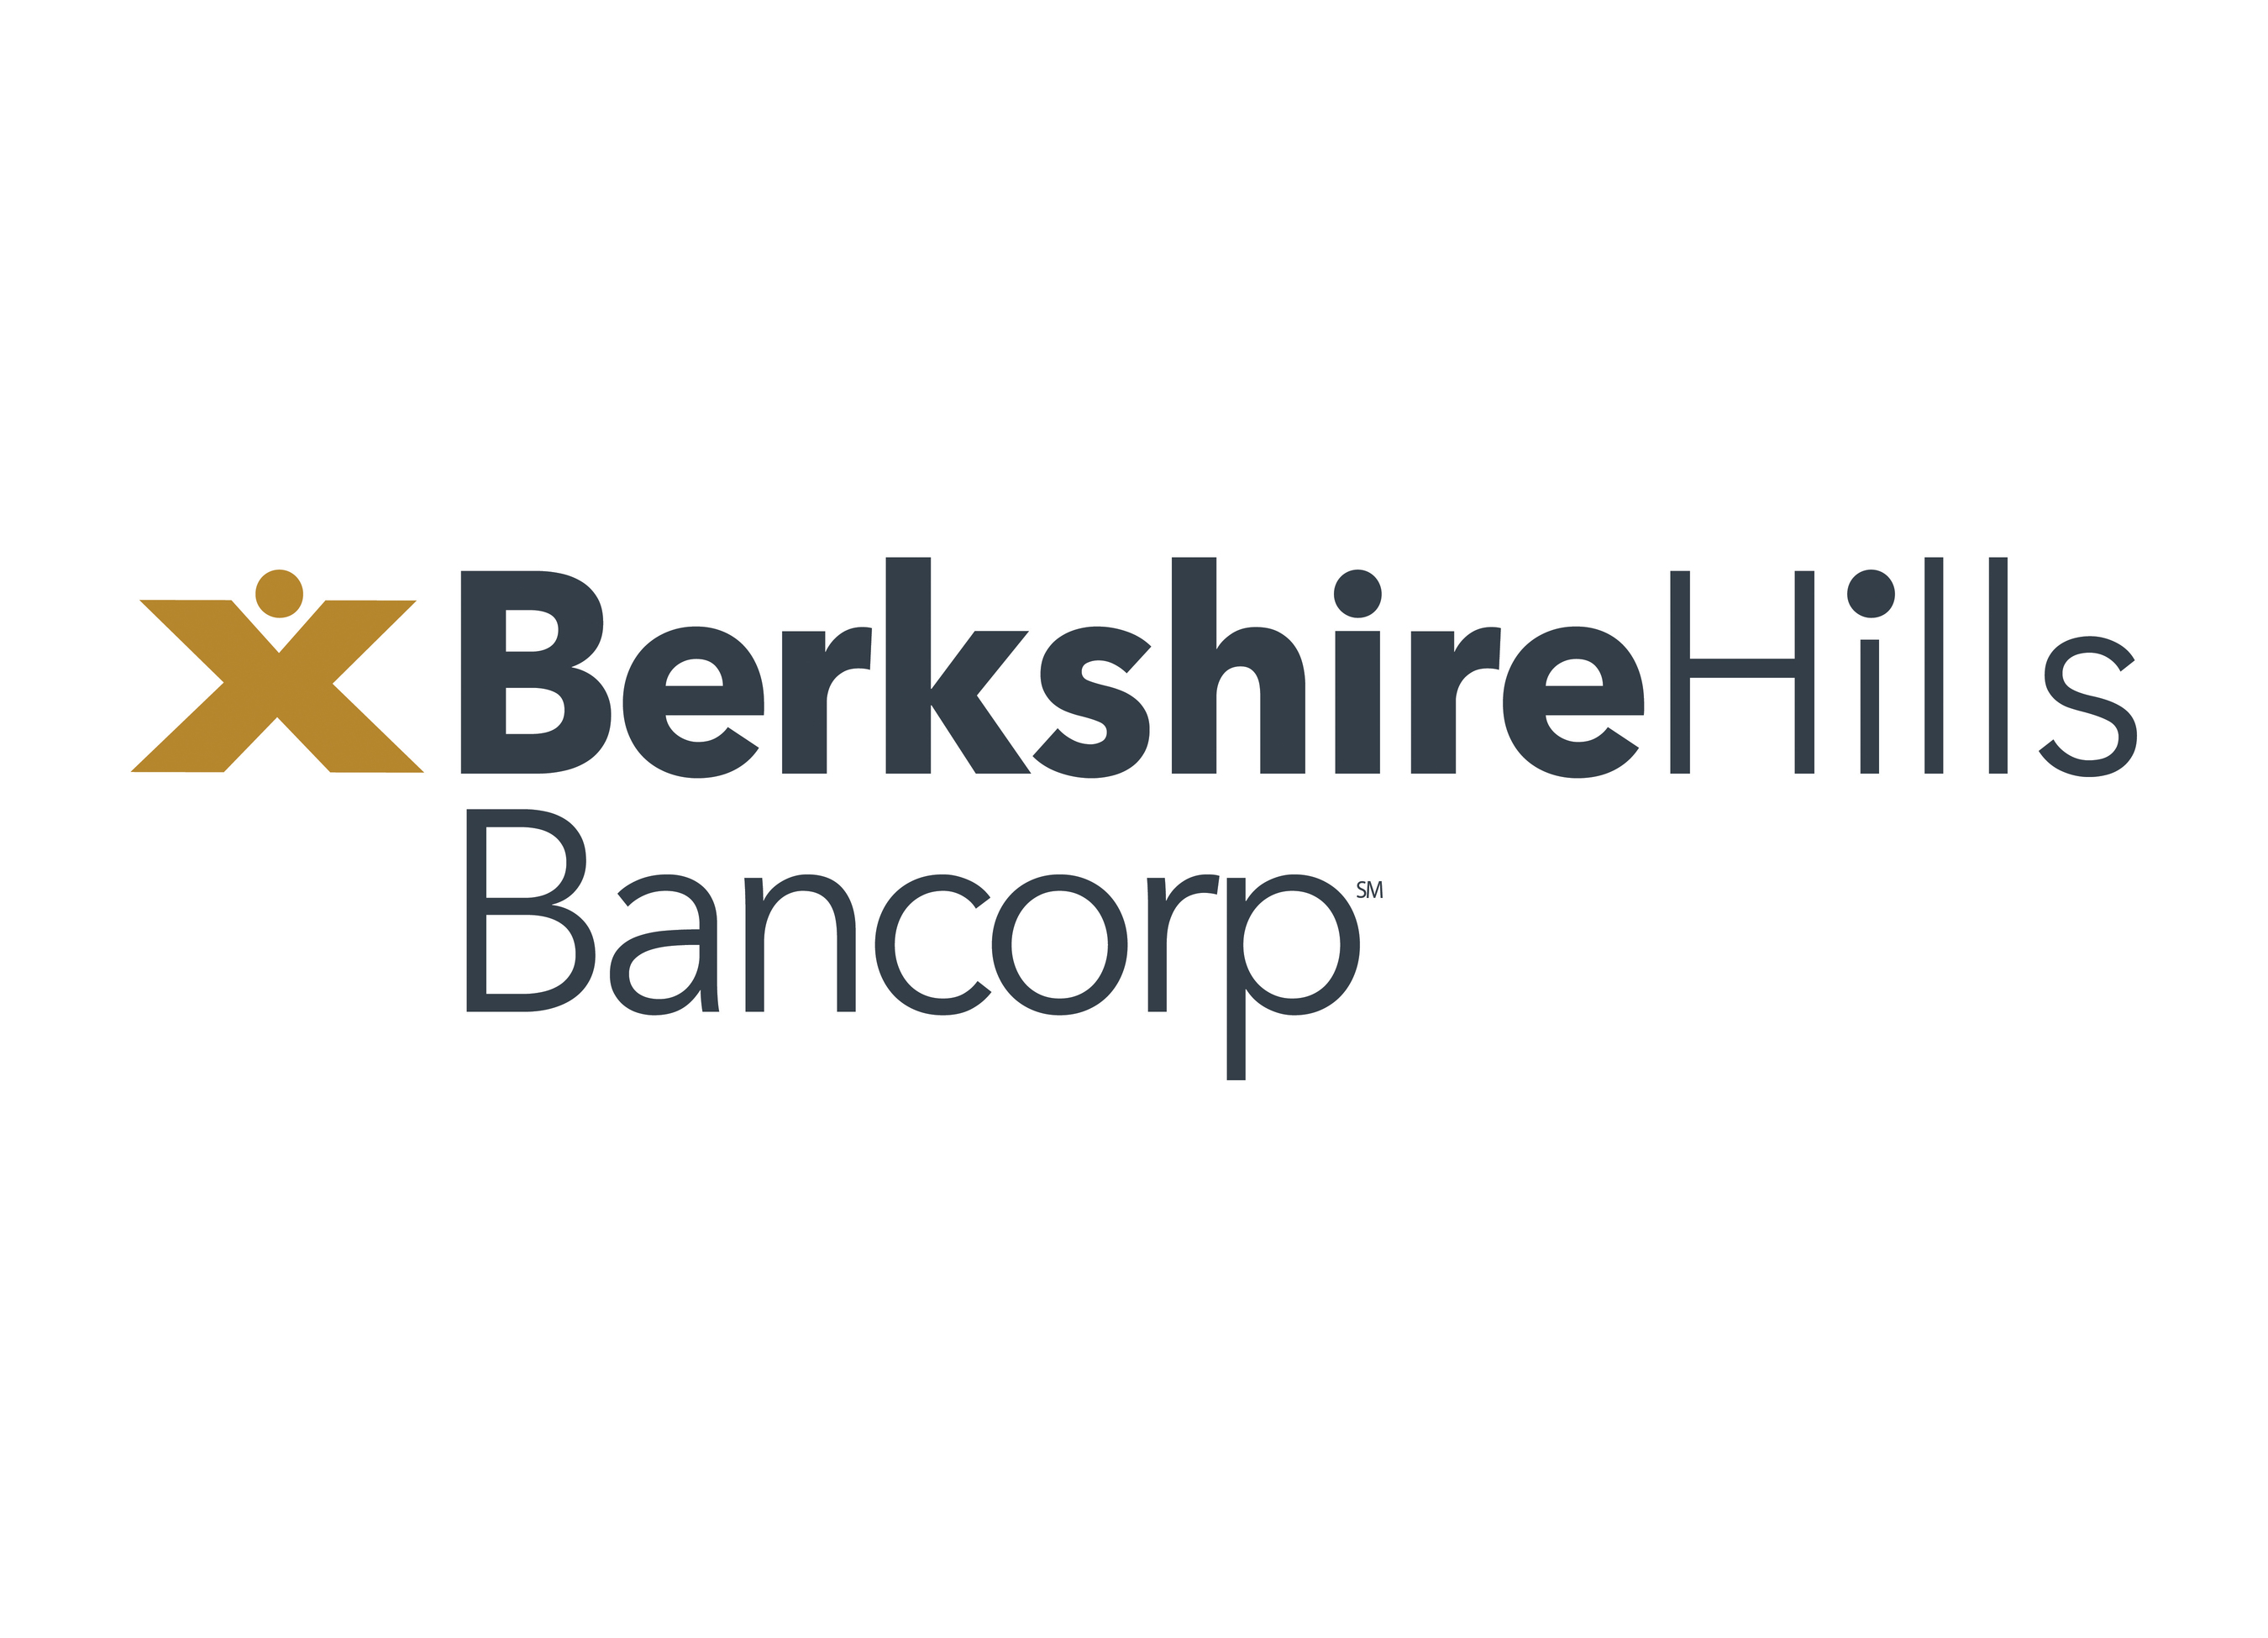 Berkshire Hills Fourth Quarter 2018 Earnings Release and Conference Call Dates